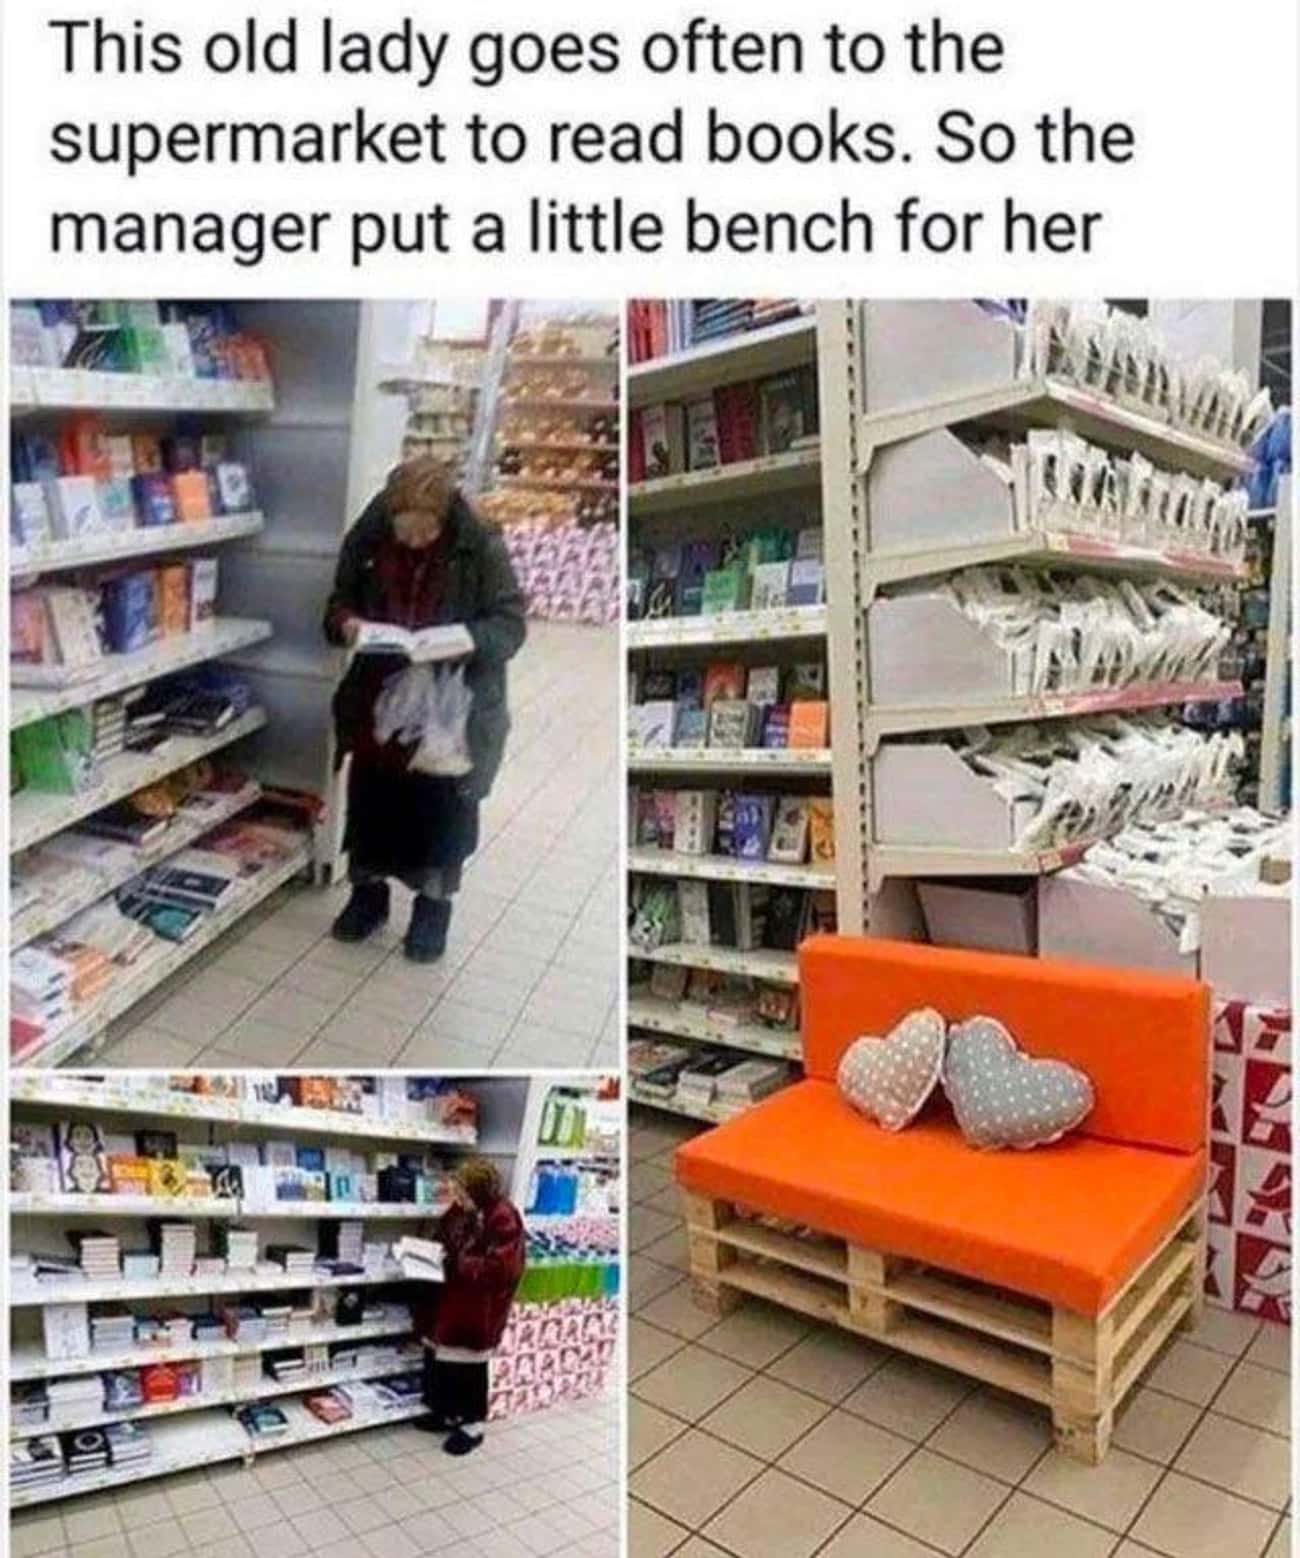 A Little Bench Just For Her